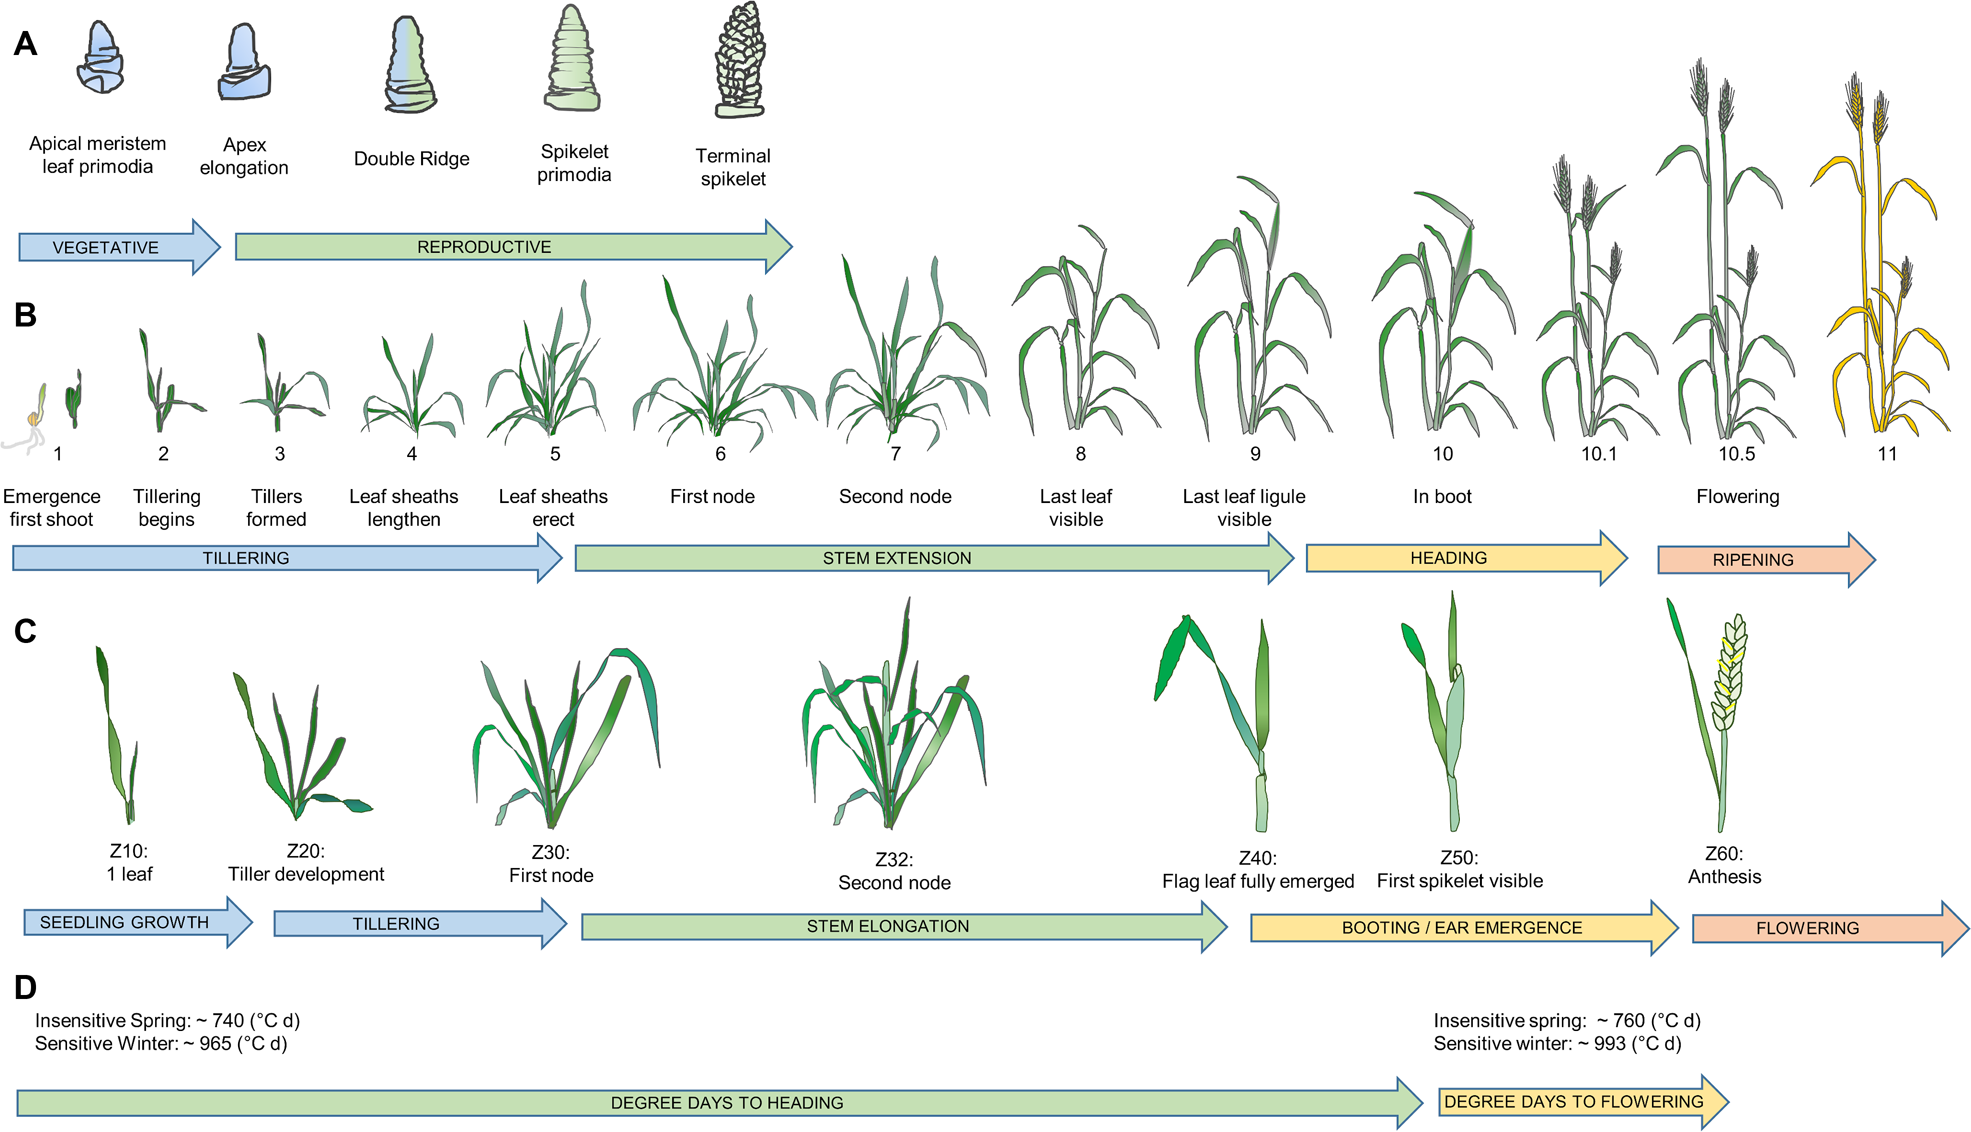 Phenology and related traits for wheat adaptation | Heredity